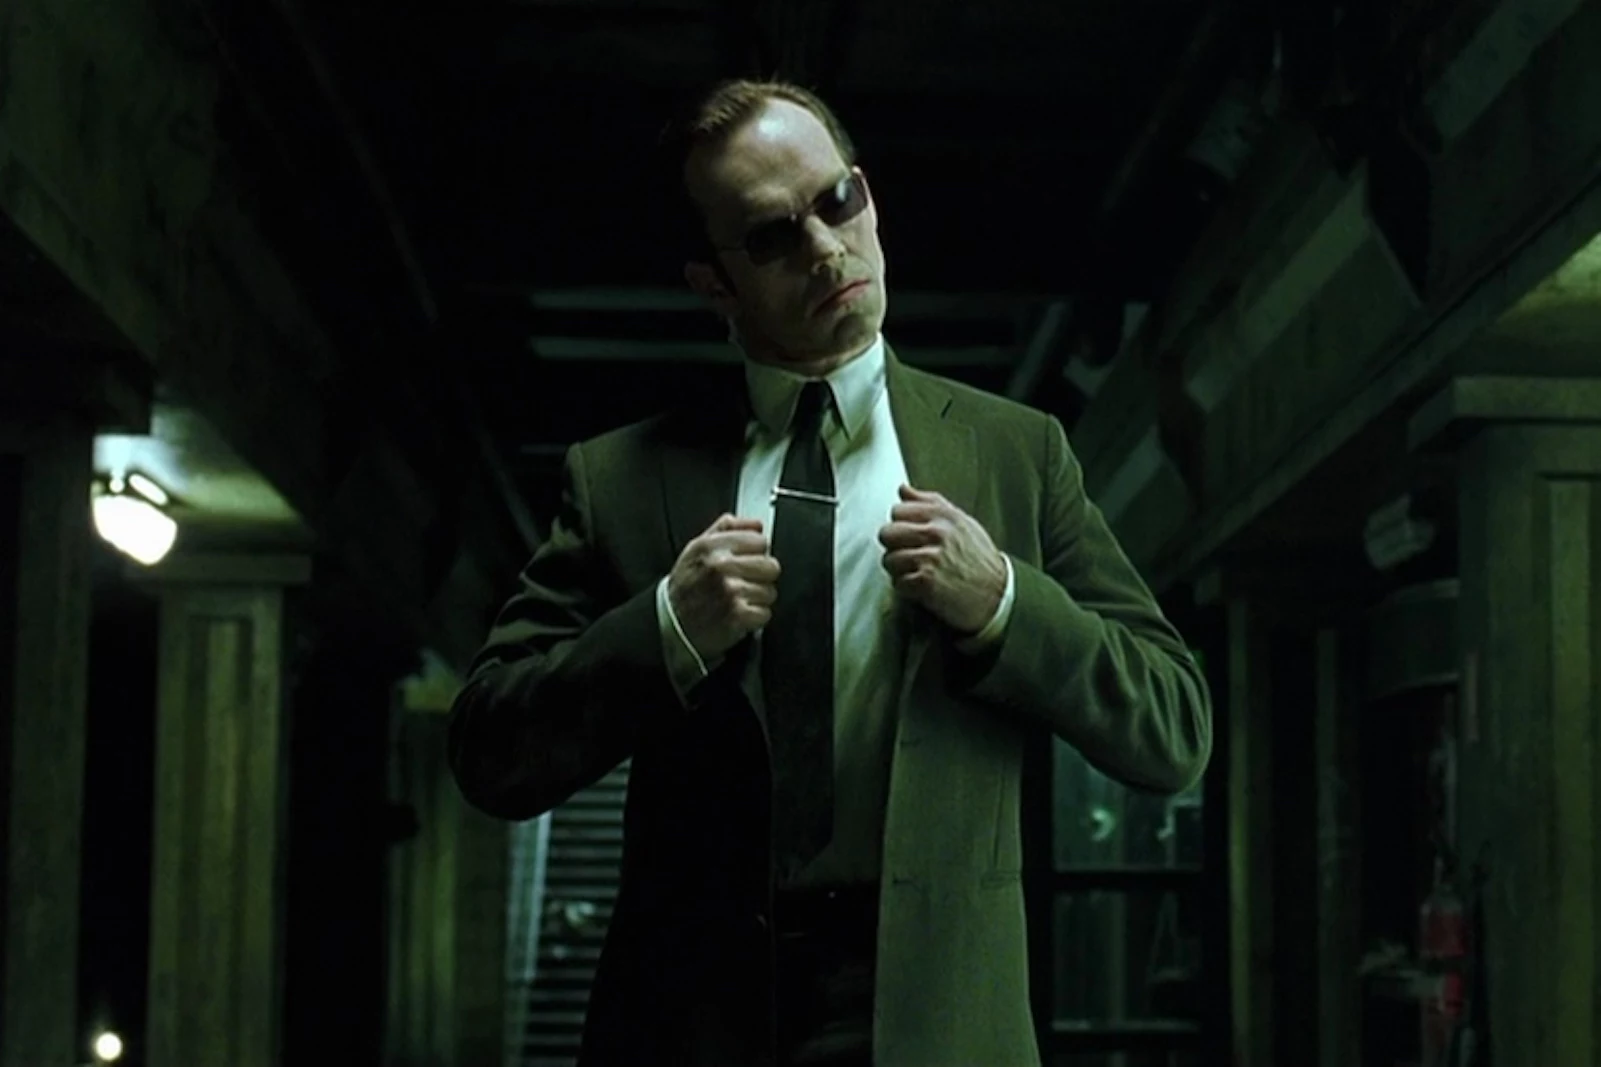 Hugo Weaving Not Appearing in 'Matrix 4' as Agent Smith